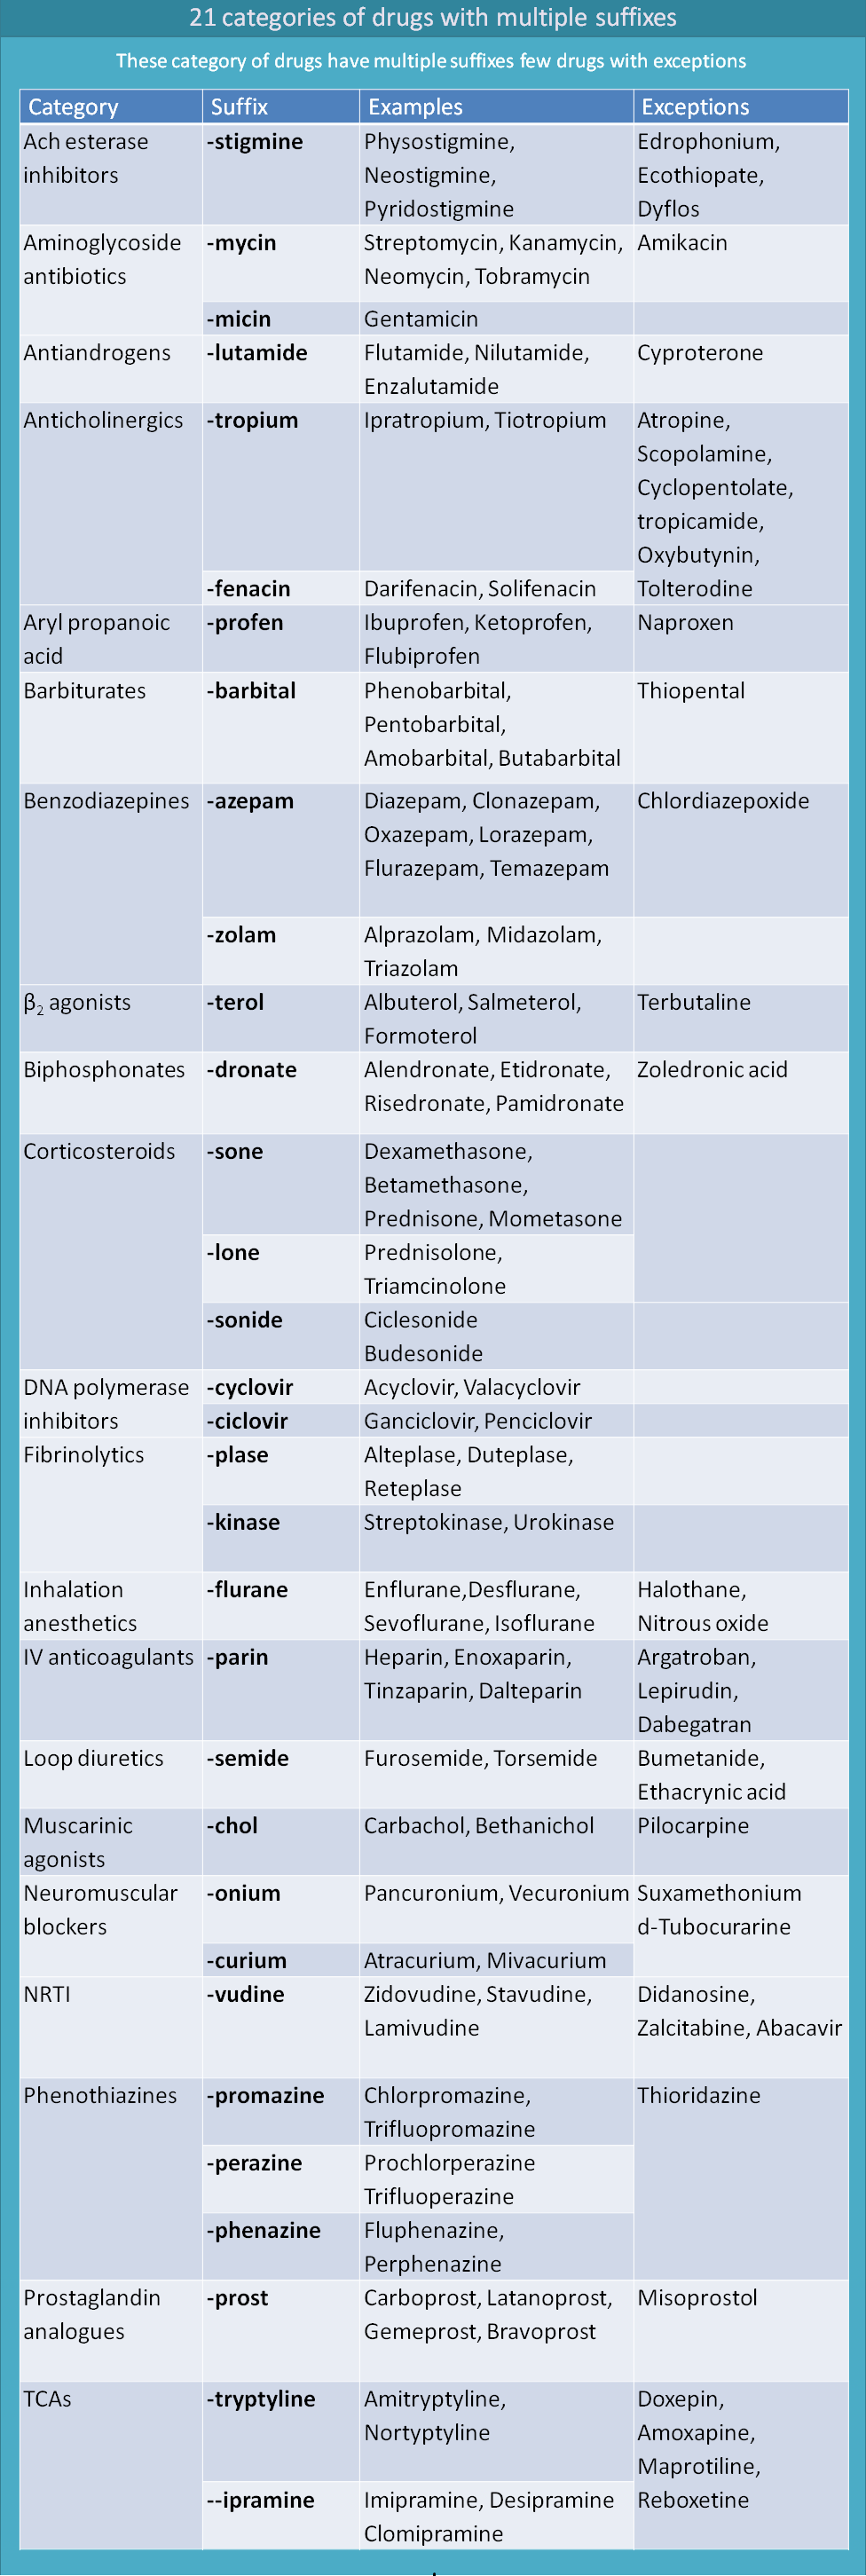 21 category of drugs with multiple suffixes